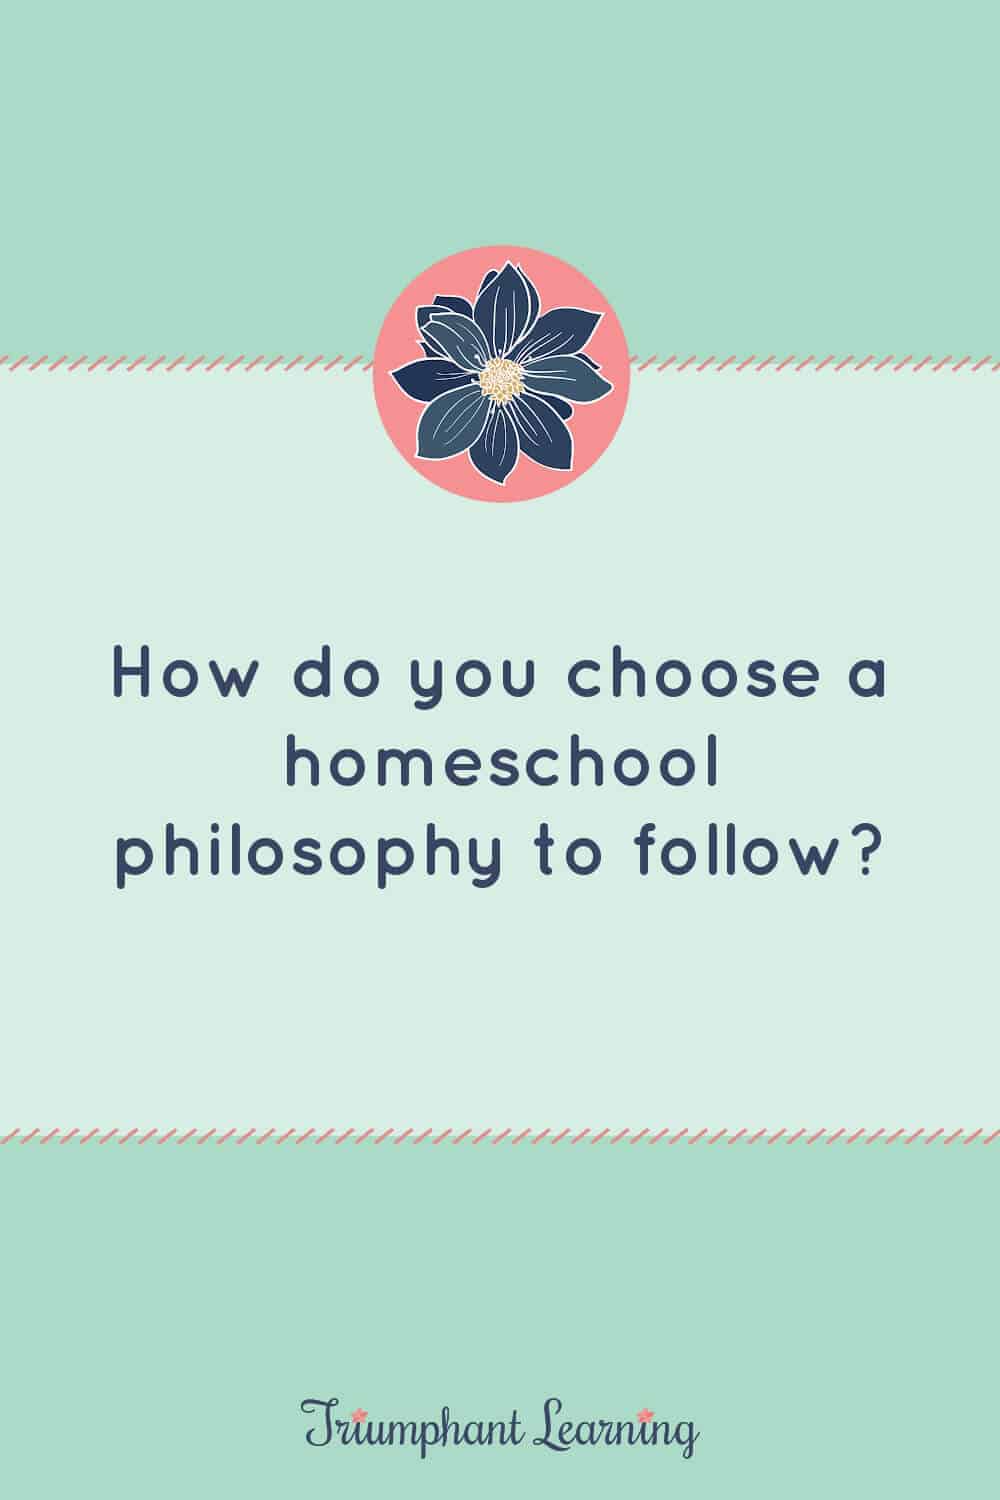 Learn what you need to know to choose a homeschool philosophy. Includes an overview and resource suggestions of seven common homeschool approaches. via @TriLearning